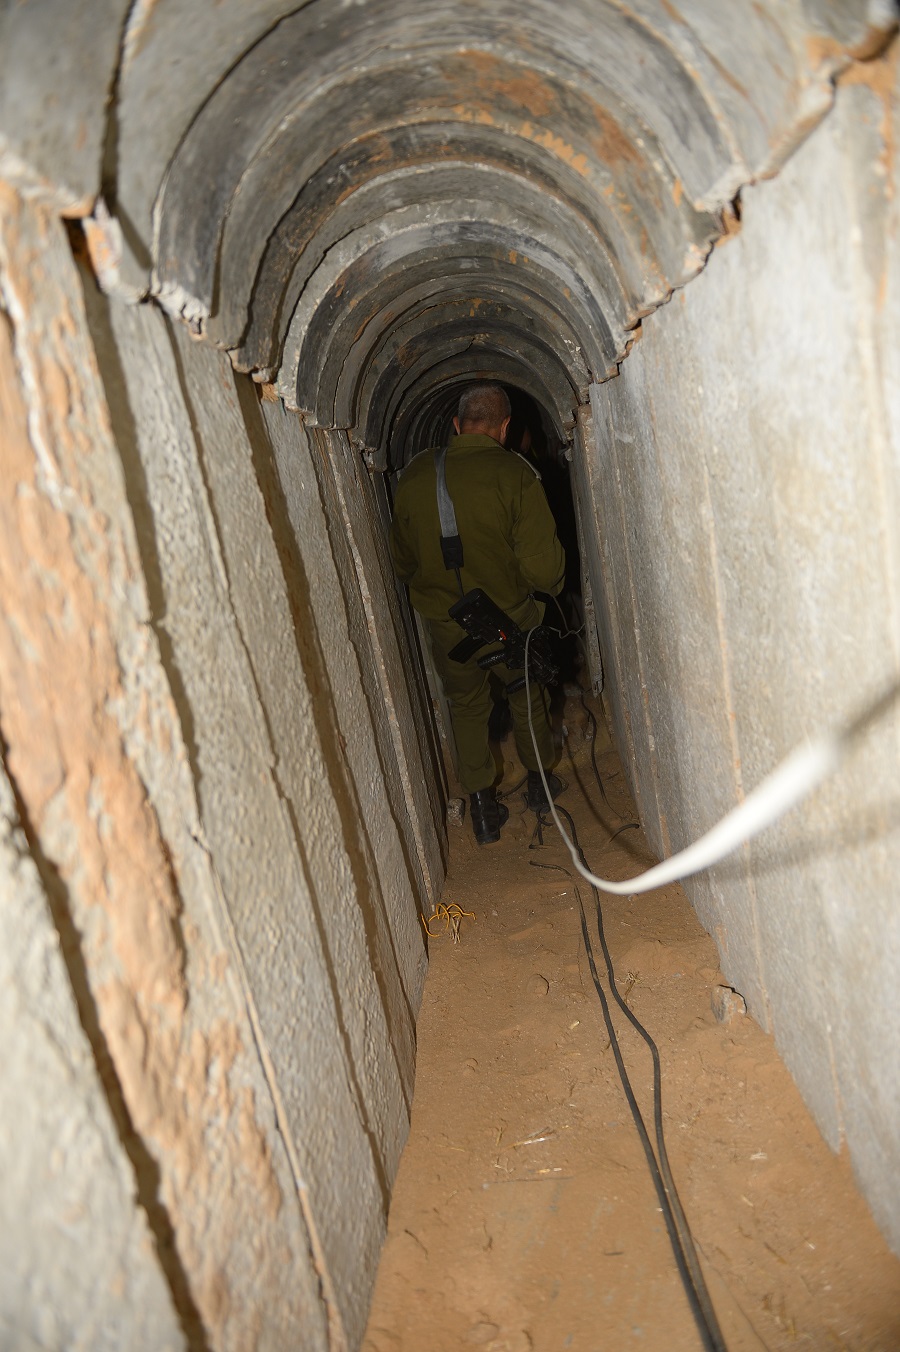 Israel is using special weapons in an effort to destroy tunnels constructed by the Hamas organization beneath Gaza. This network of underground tunnels, referred to as "Metro City" by the IDF, primarily serves as a hiding place for the Hamas leadership, which the IDF has been attempting to target since the beginning of the conflict.